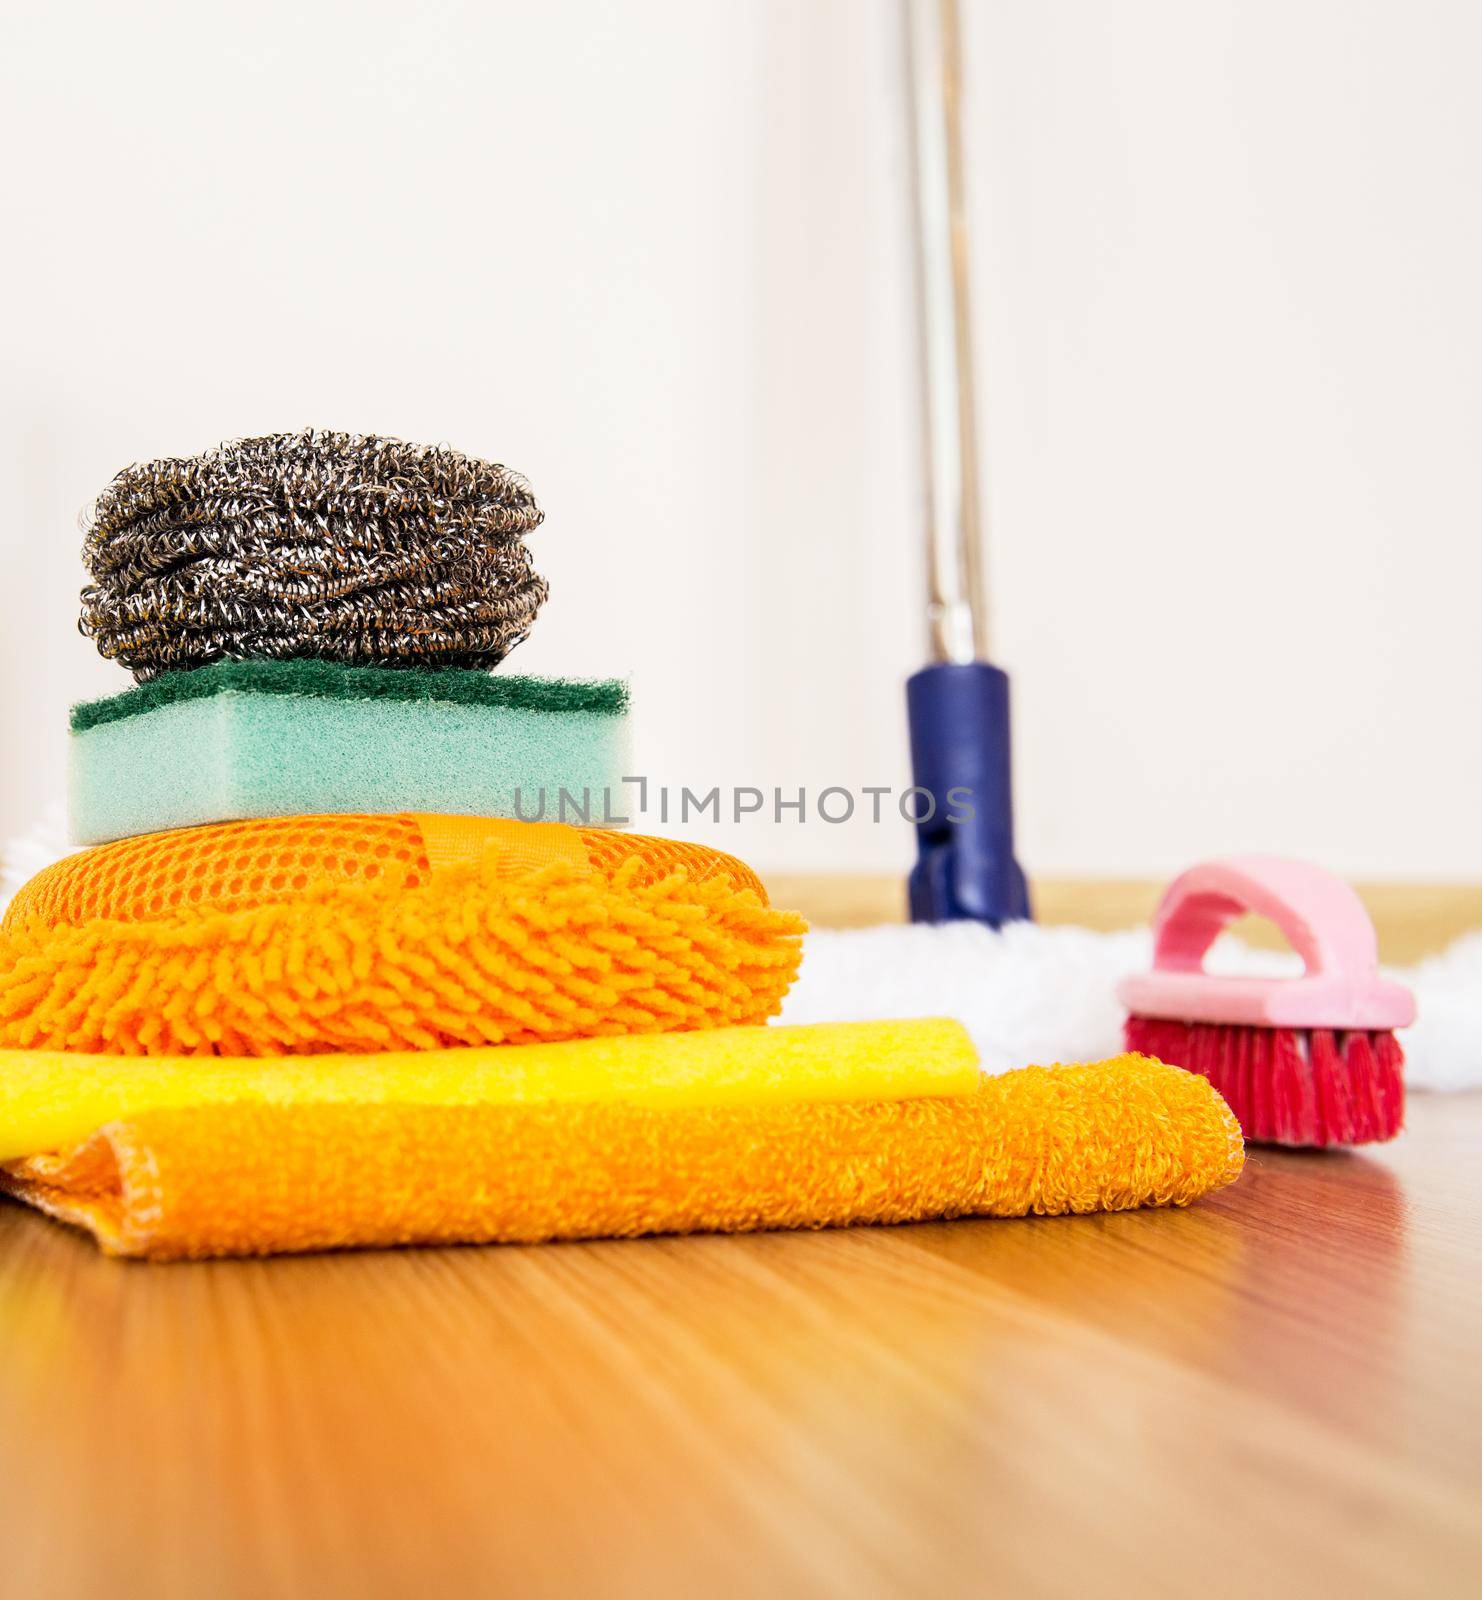 set of cleaning equipment on a wooden floor